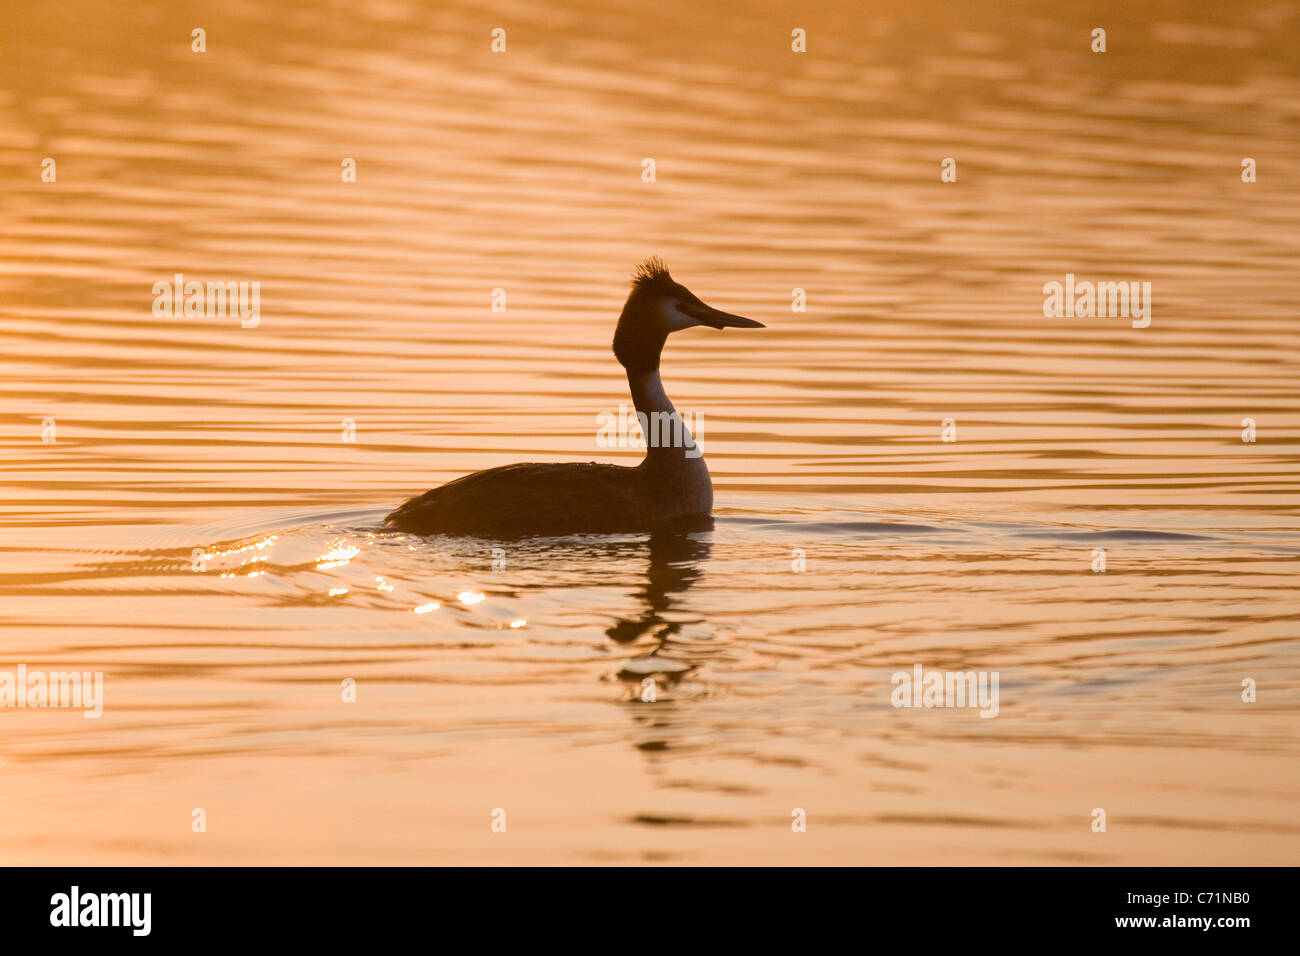 Great Crested Grebe at Sunrise on Hickling Broad Norfolk UK Stock Photo